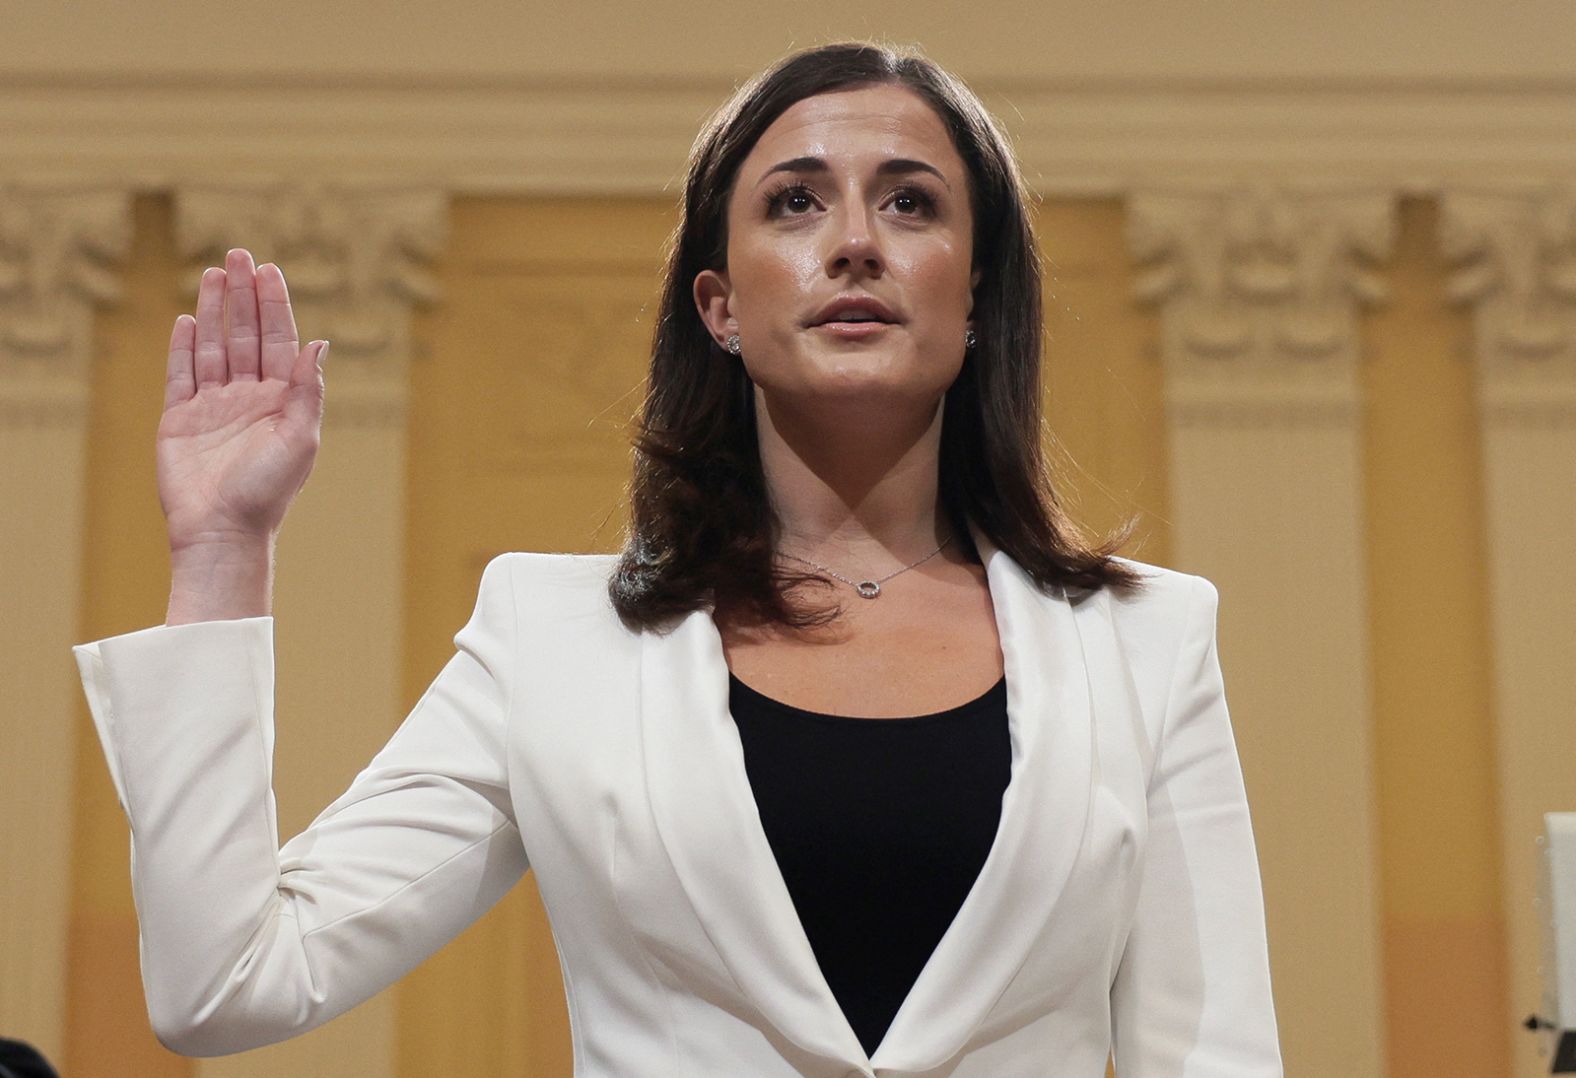 Cassidy Hutchinson, who was once an aide to White House Chief of Staff Mark Meadows, is sworn in to testify during a hearing on June 28. <a href="index.php?page=&url=https%3A%2F%2Fwww.cnn.com%2F2022%2F06%2F28%2Fpolitics%2Fjanuary-6-hearing-day-6-takeaways-hutchinson%2Findex.html" target="_blank">In her testimony,</a> Hutchinson revealed how President Trump and his inner circle were warned about the potential for violence on January 6, and she said Trump wanted to join his supporters at the US Capitol.